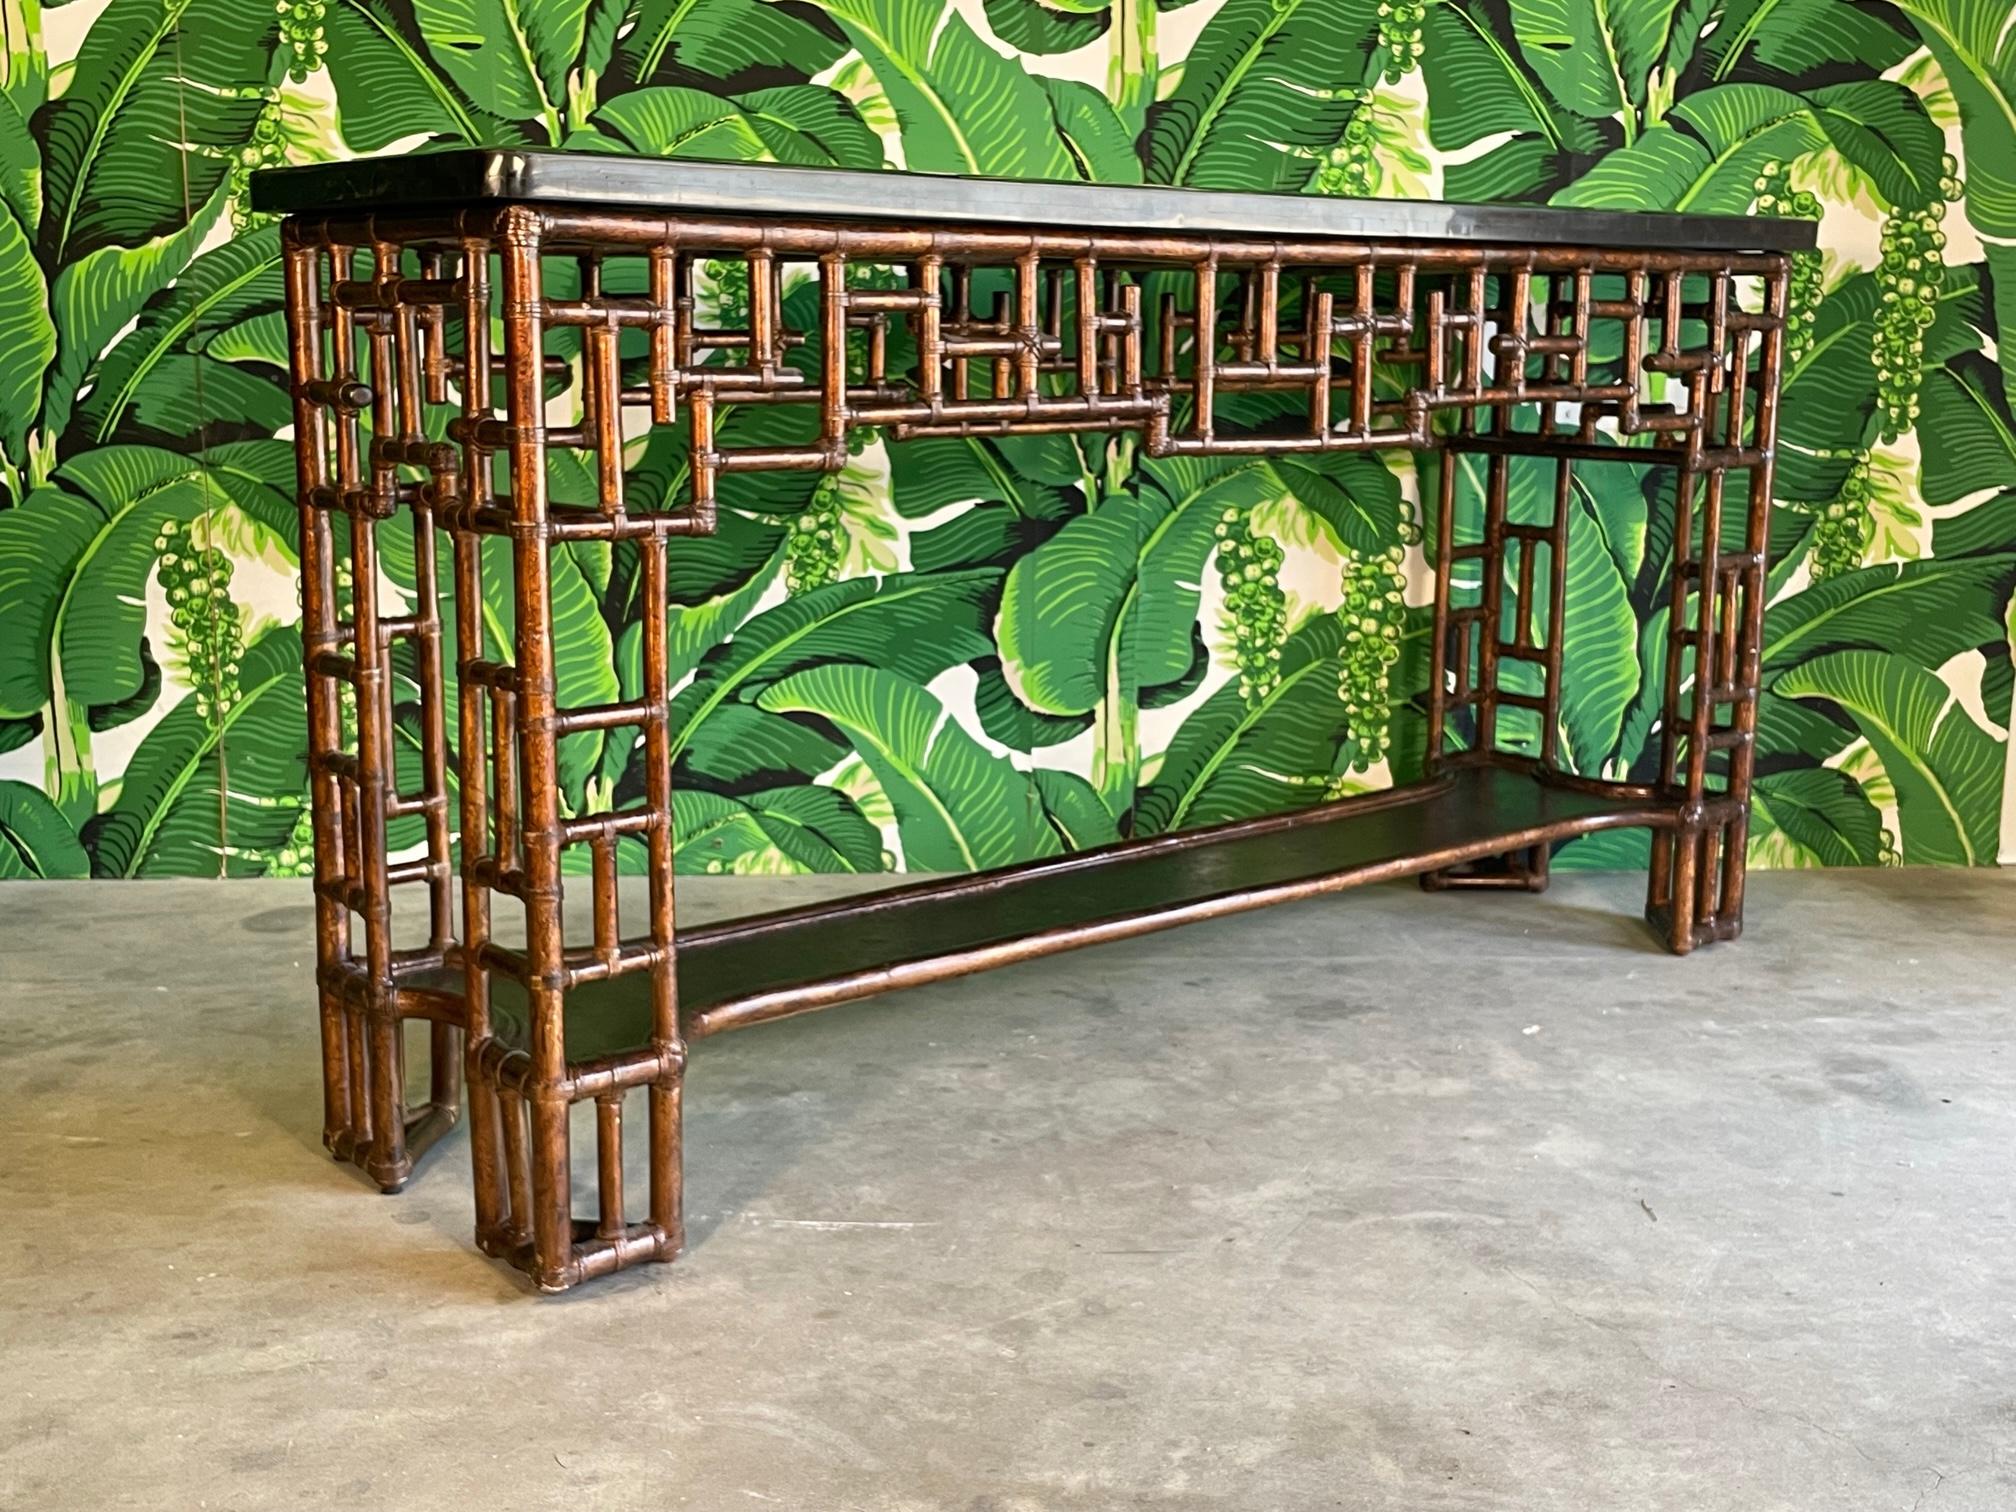 Burnt rattan/bamboo console table features a tessellated marble top with beveled edges and decorative inlay, and a deep, rich finish to the leather-wrapped frame. Chinese chippendale fretwork is mirrored on front and back. Good condition with